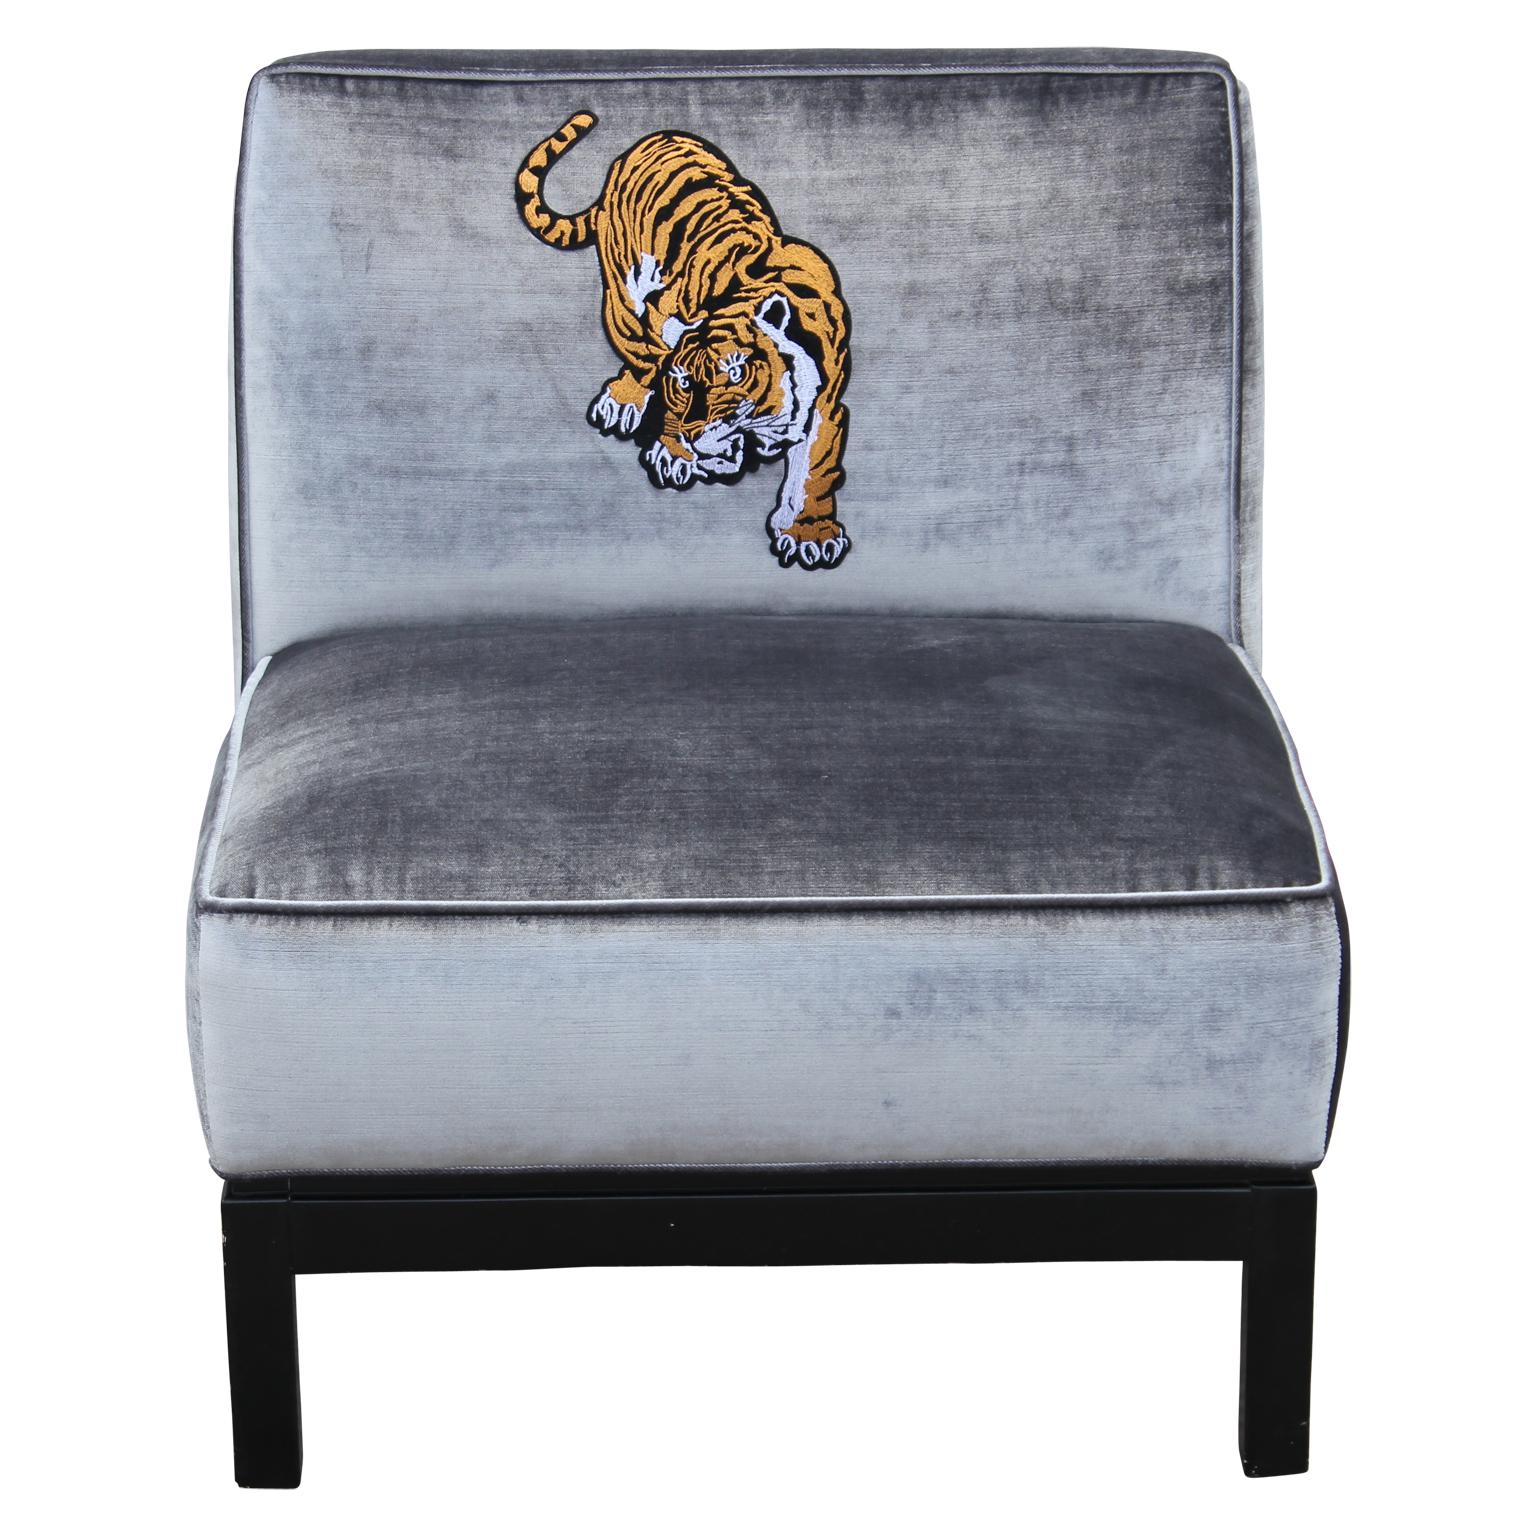 Pair of lovely clean lined slipper chairs with deep walnut bases and freshly upholstered in a lush silver/grey velvet with custom tiger motif embroidery.